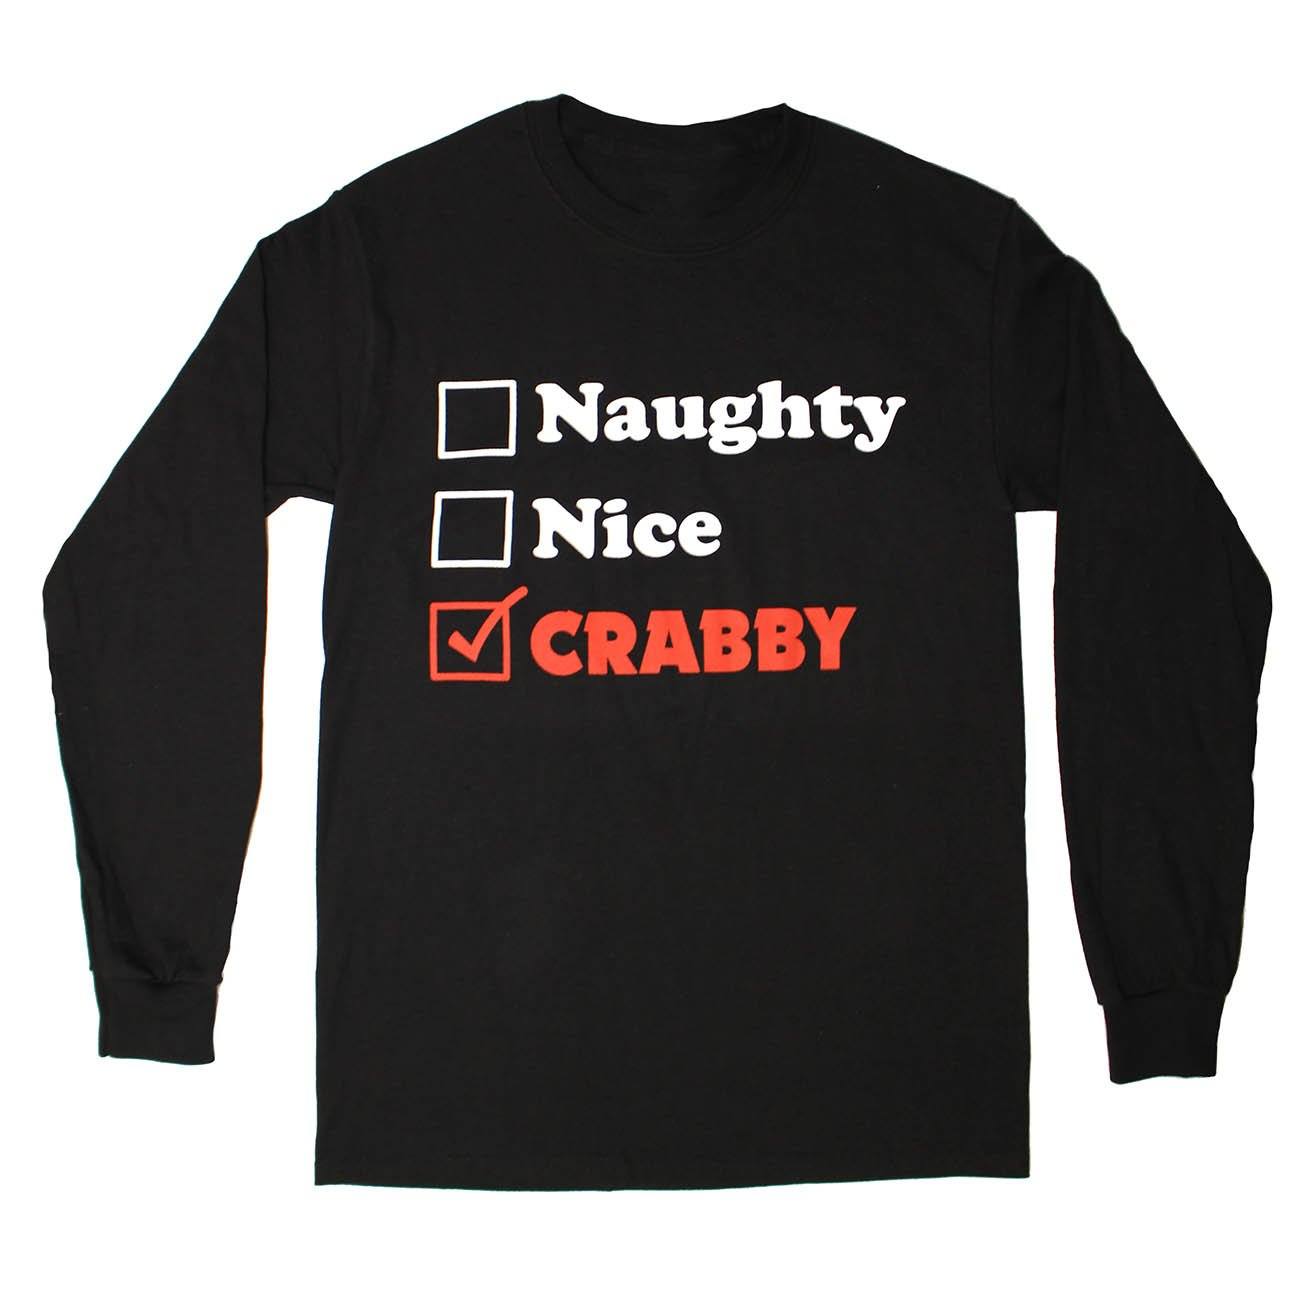 Naughty, Nice, Crabby (Black)  / Long Sleeve Shirt - Route One Apparel